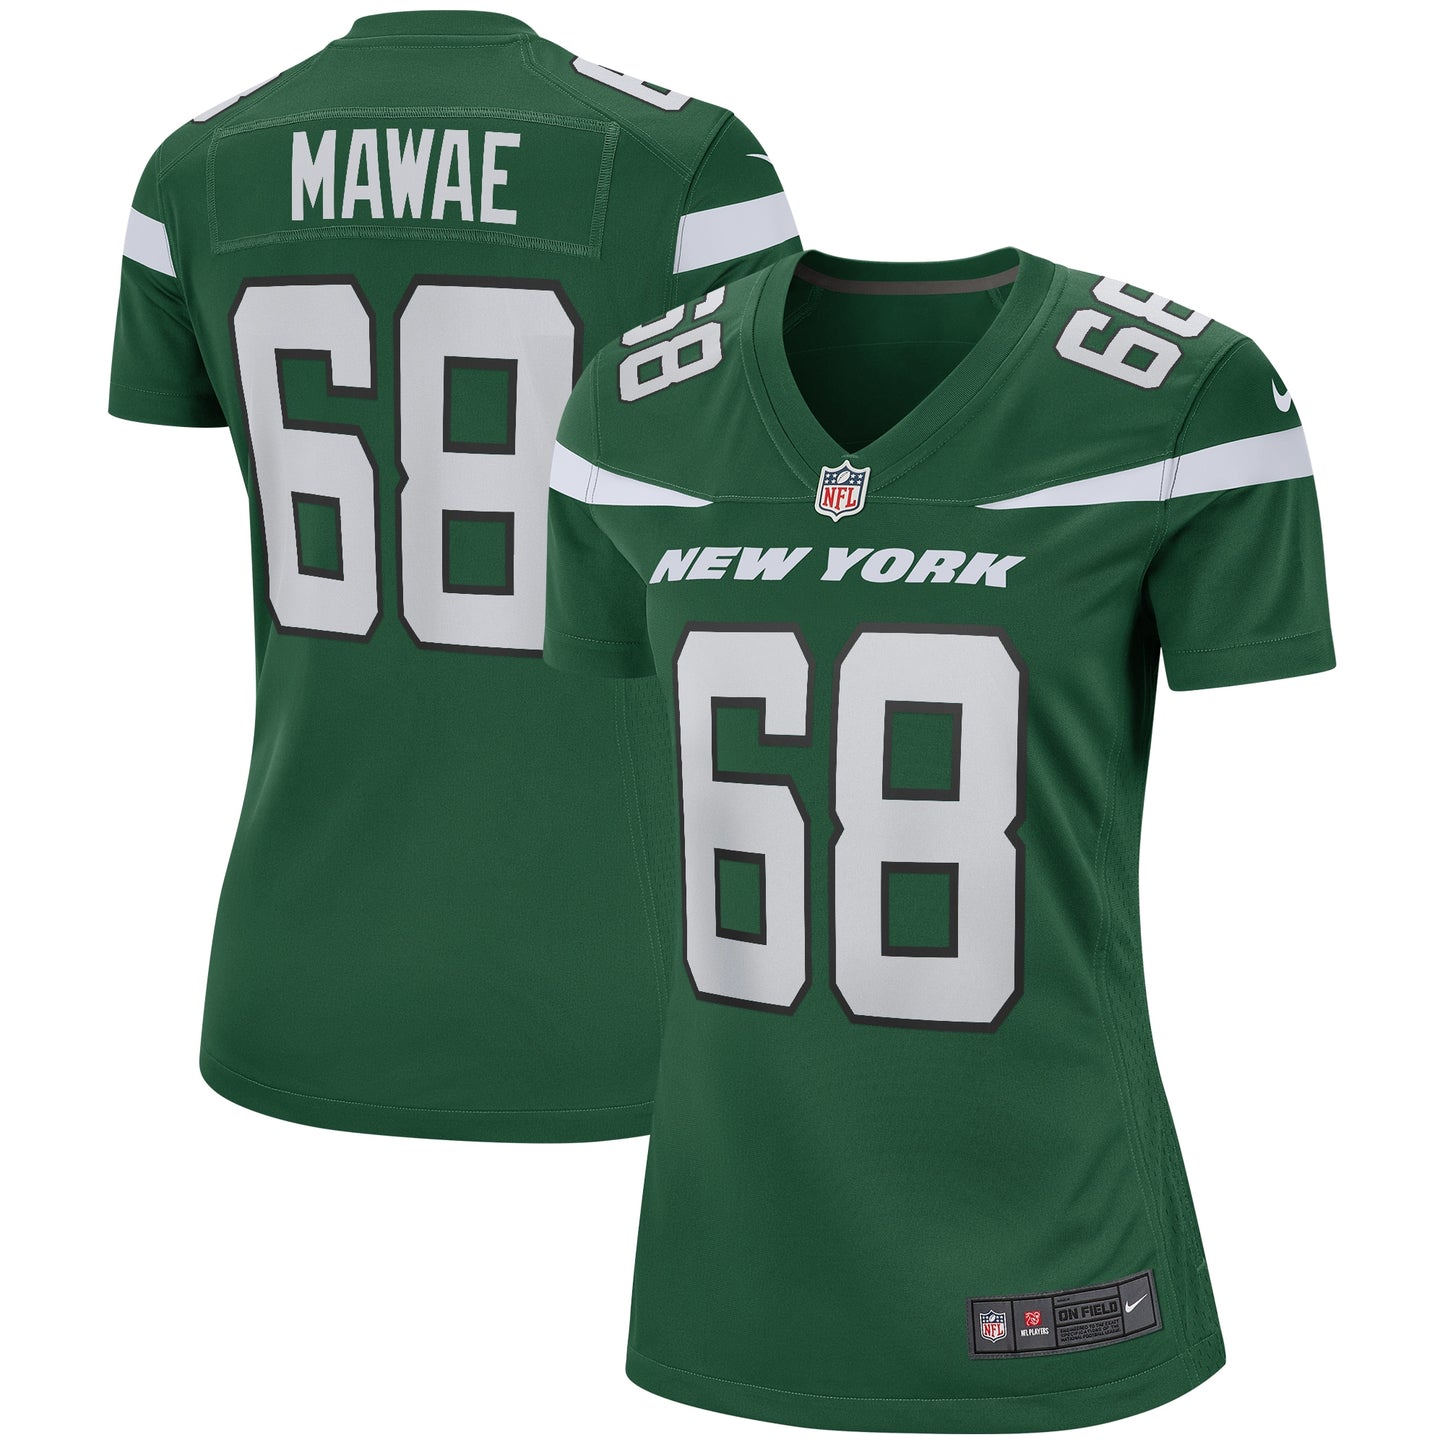 Kevin Mawae New York Jets Nike Women's Game Retired Player Jersey - Gotham Green